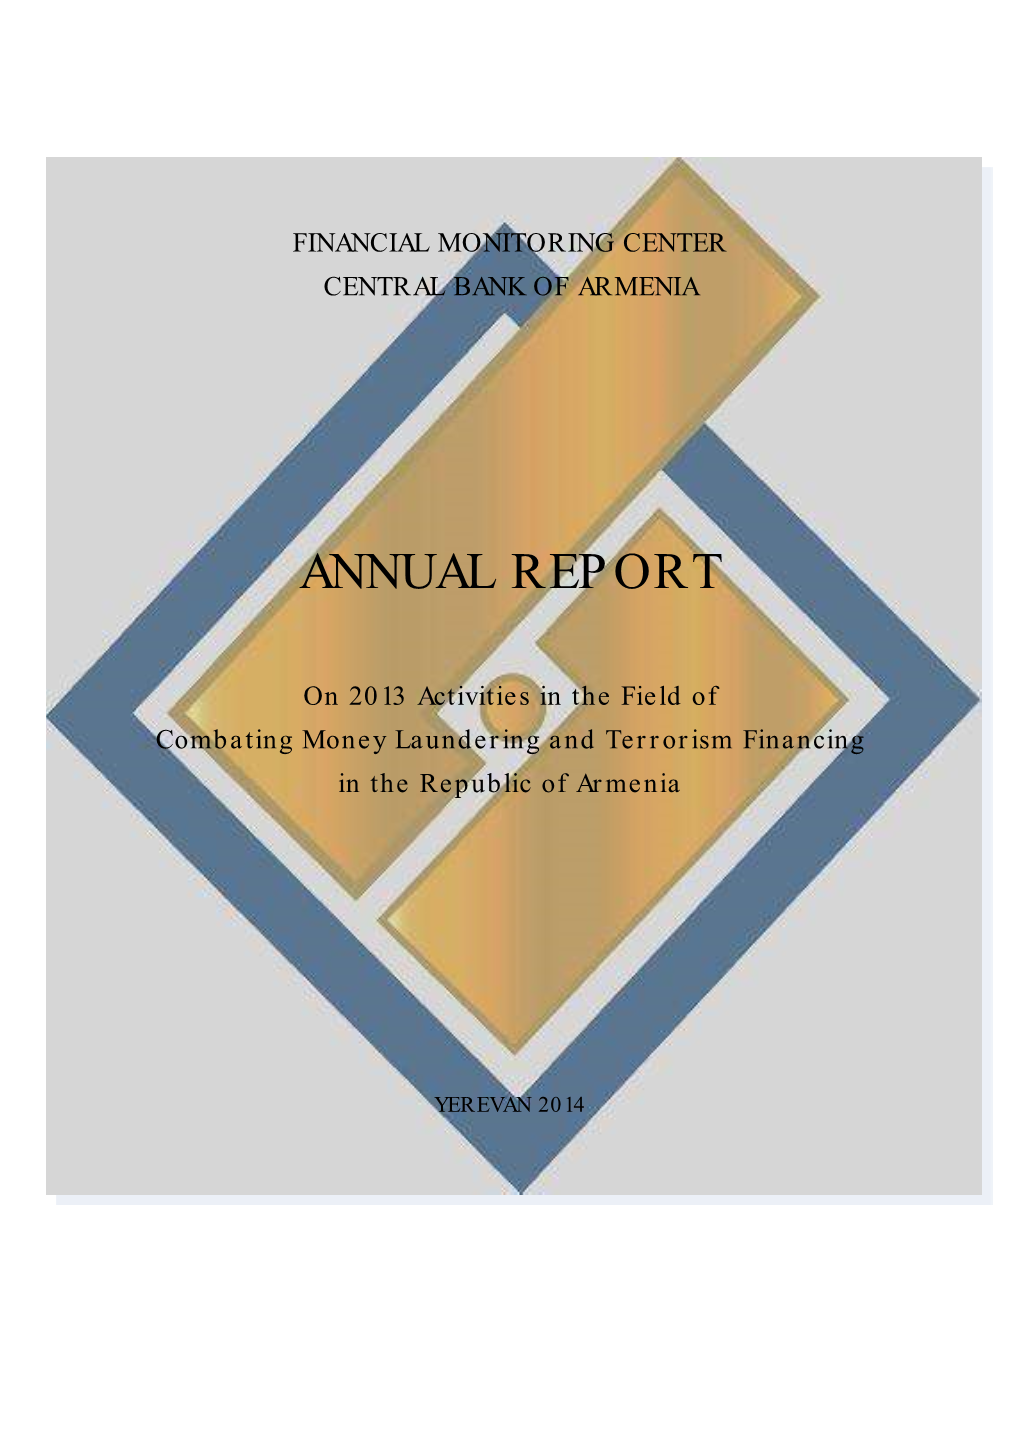 2013 Annual Report on Activities of the Financial Monitoring Center Of